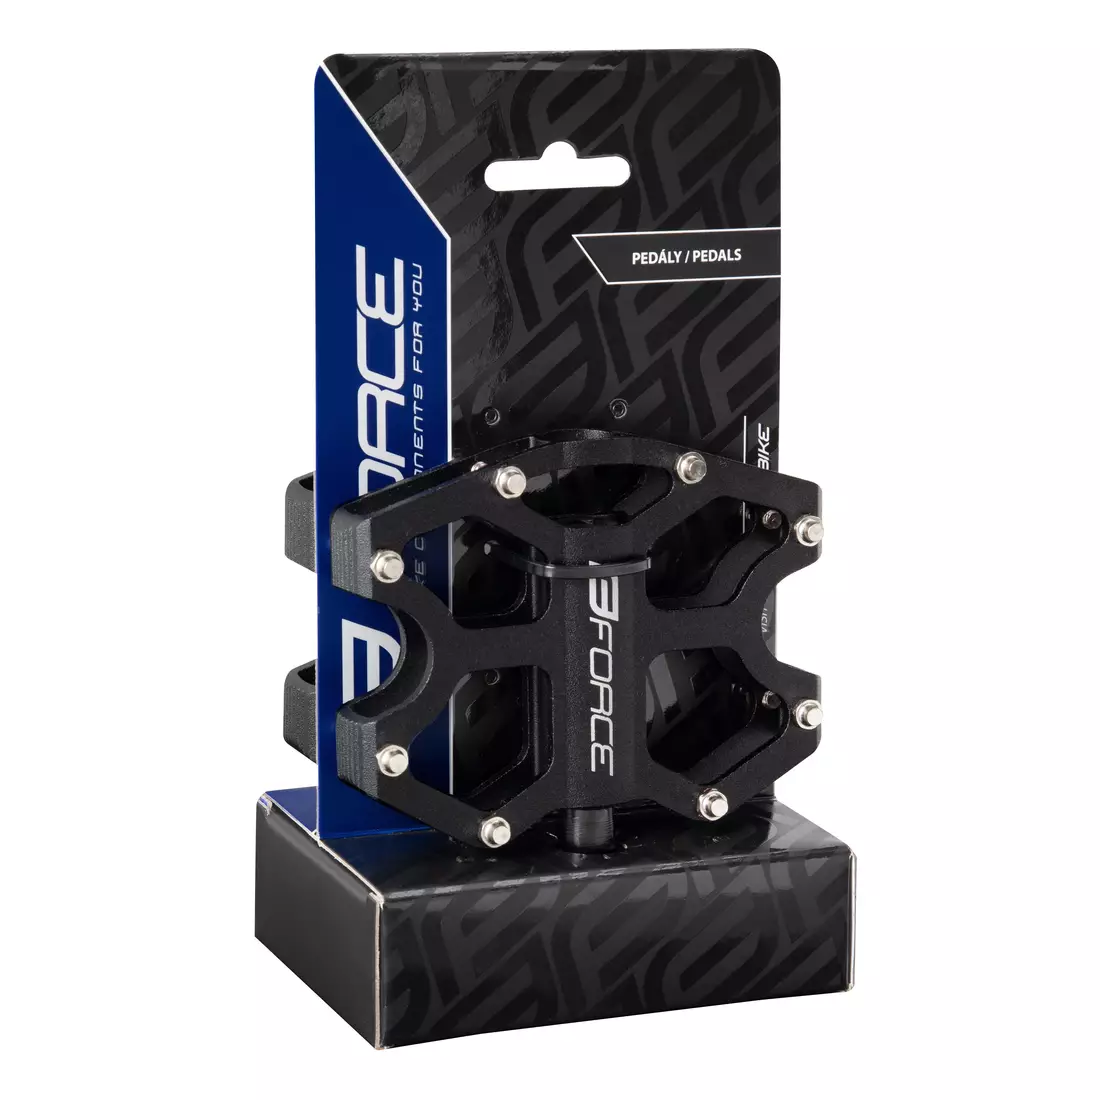 FORCE Bicycle pedals GALE aluminum, black 670332